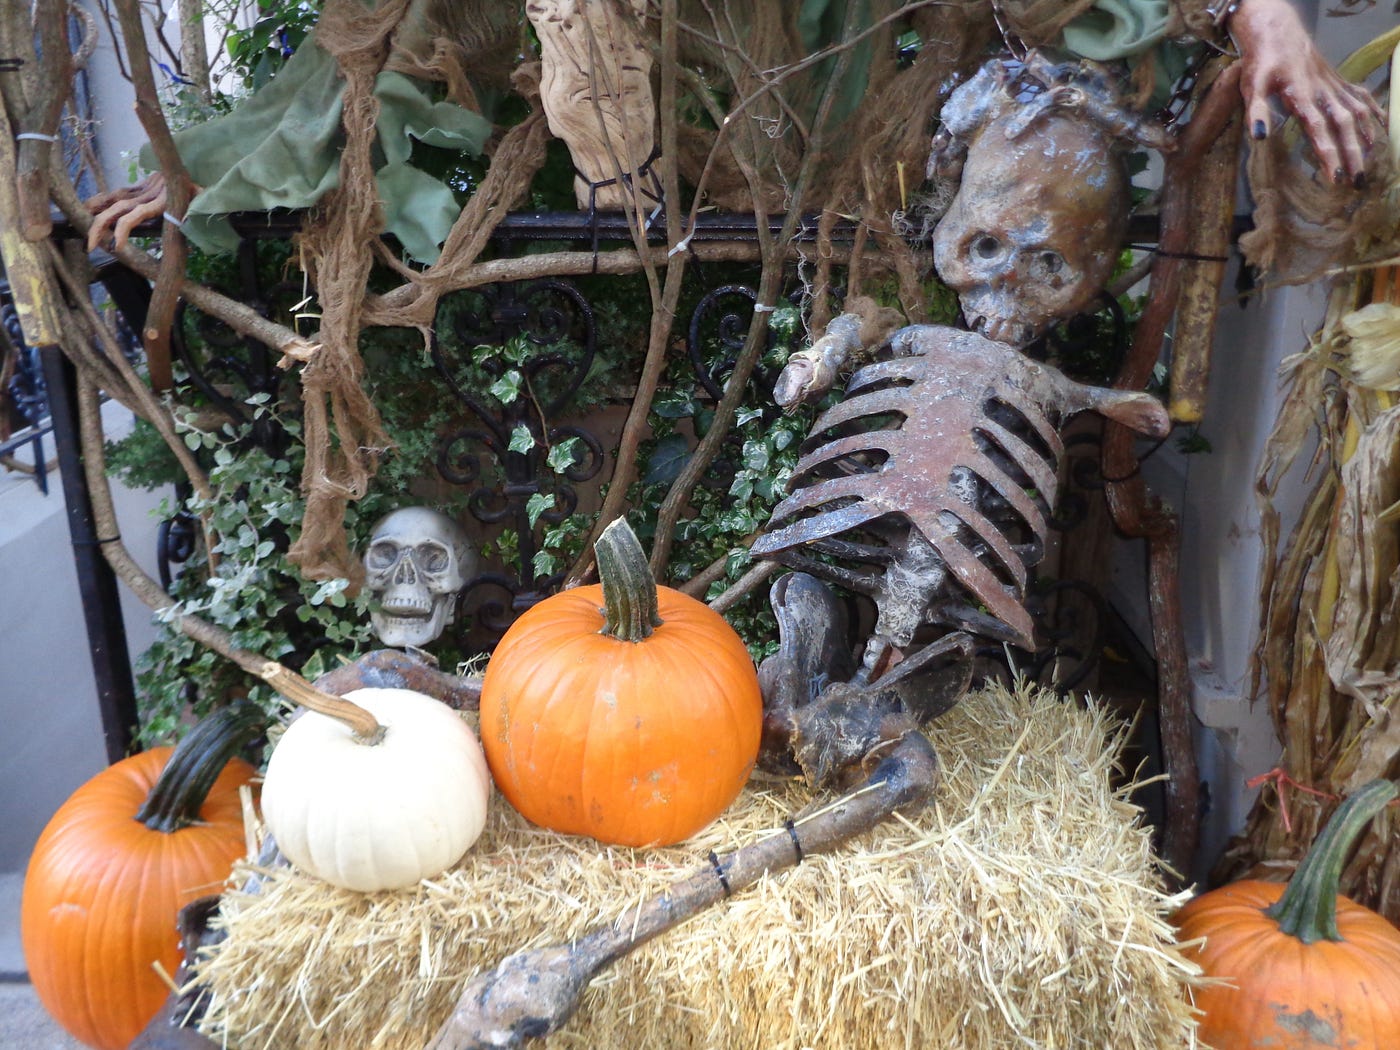 An early Halloween could be the perfect distraction from our present-day  frights